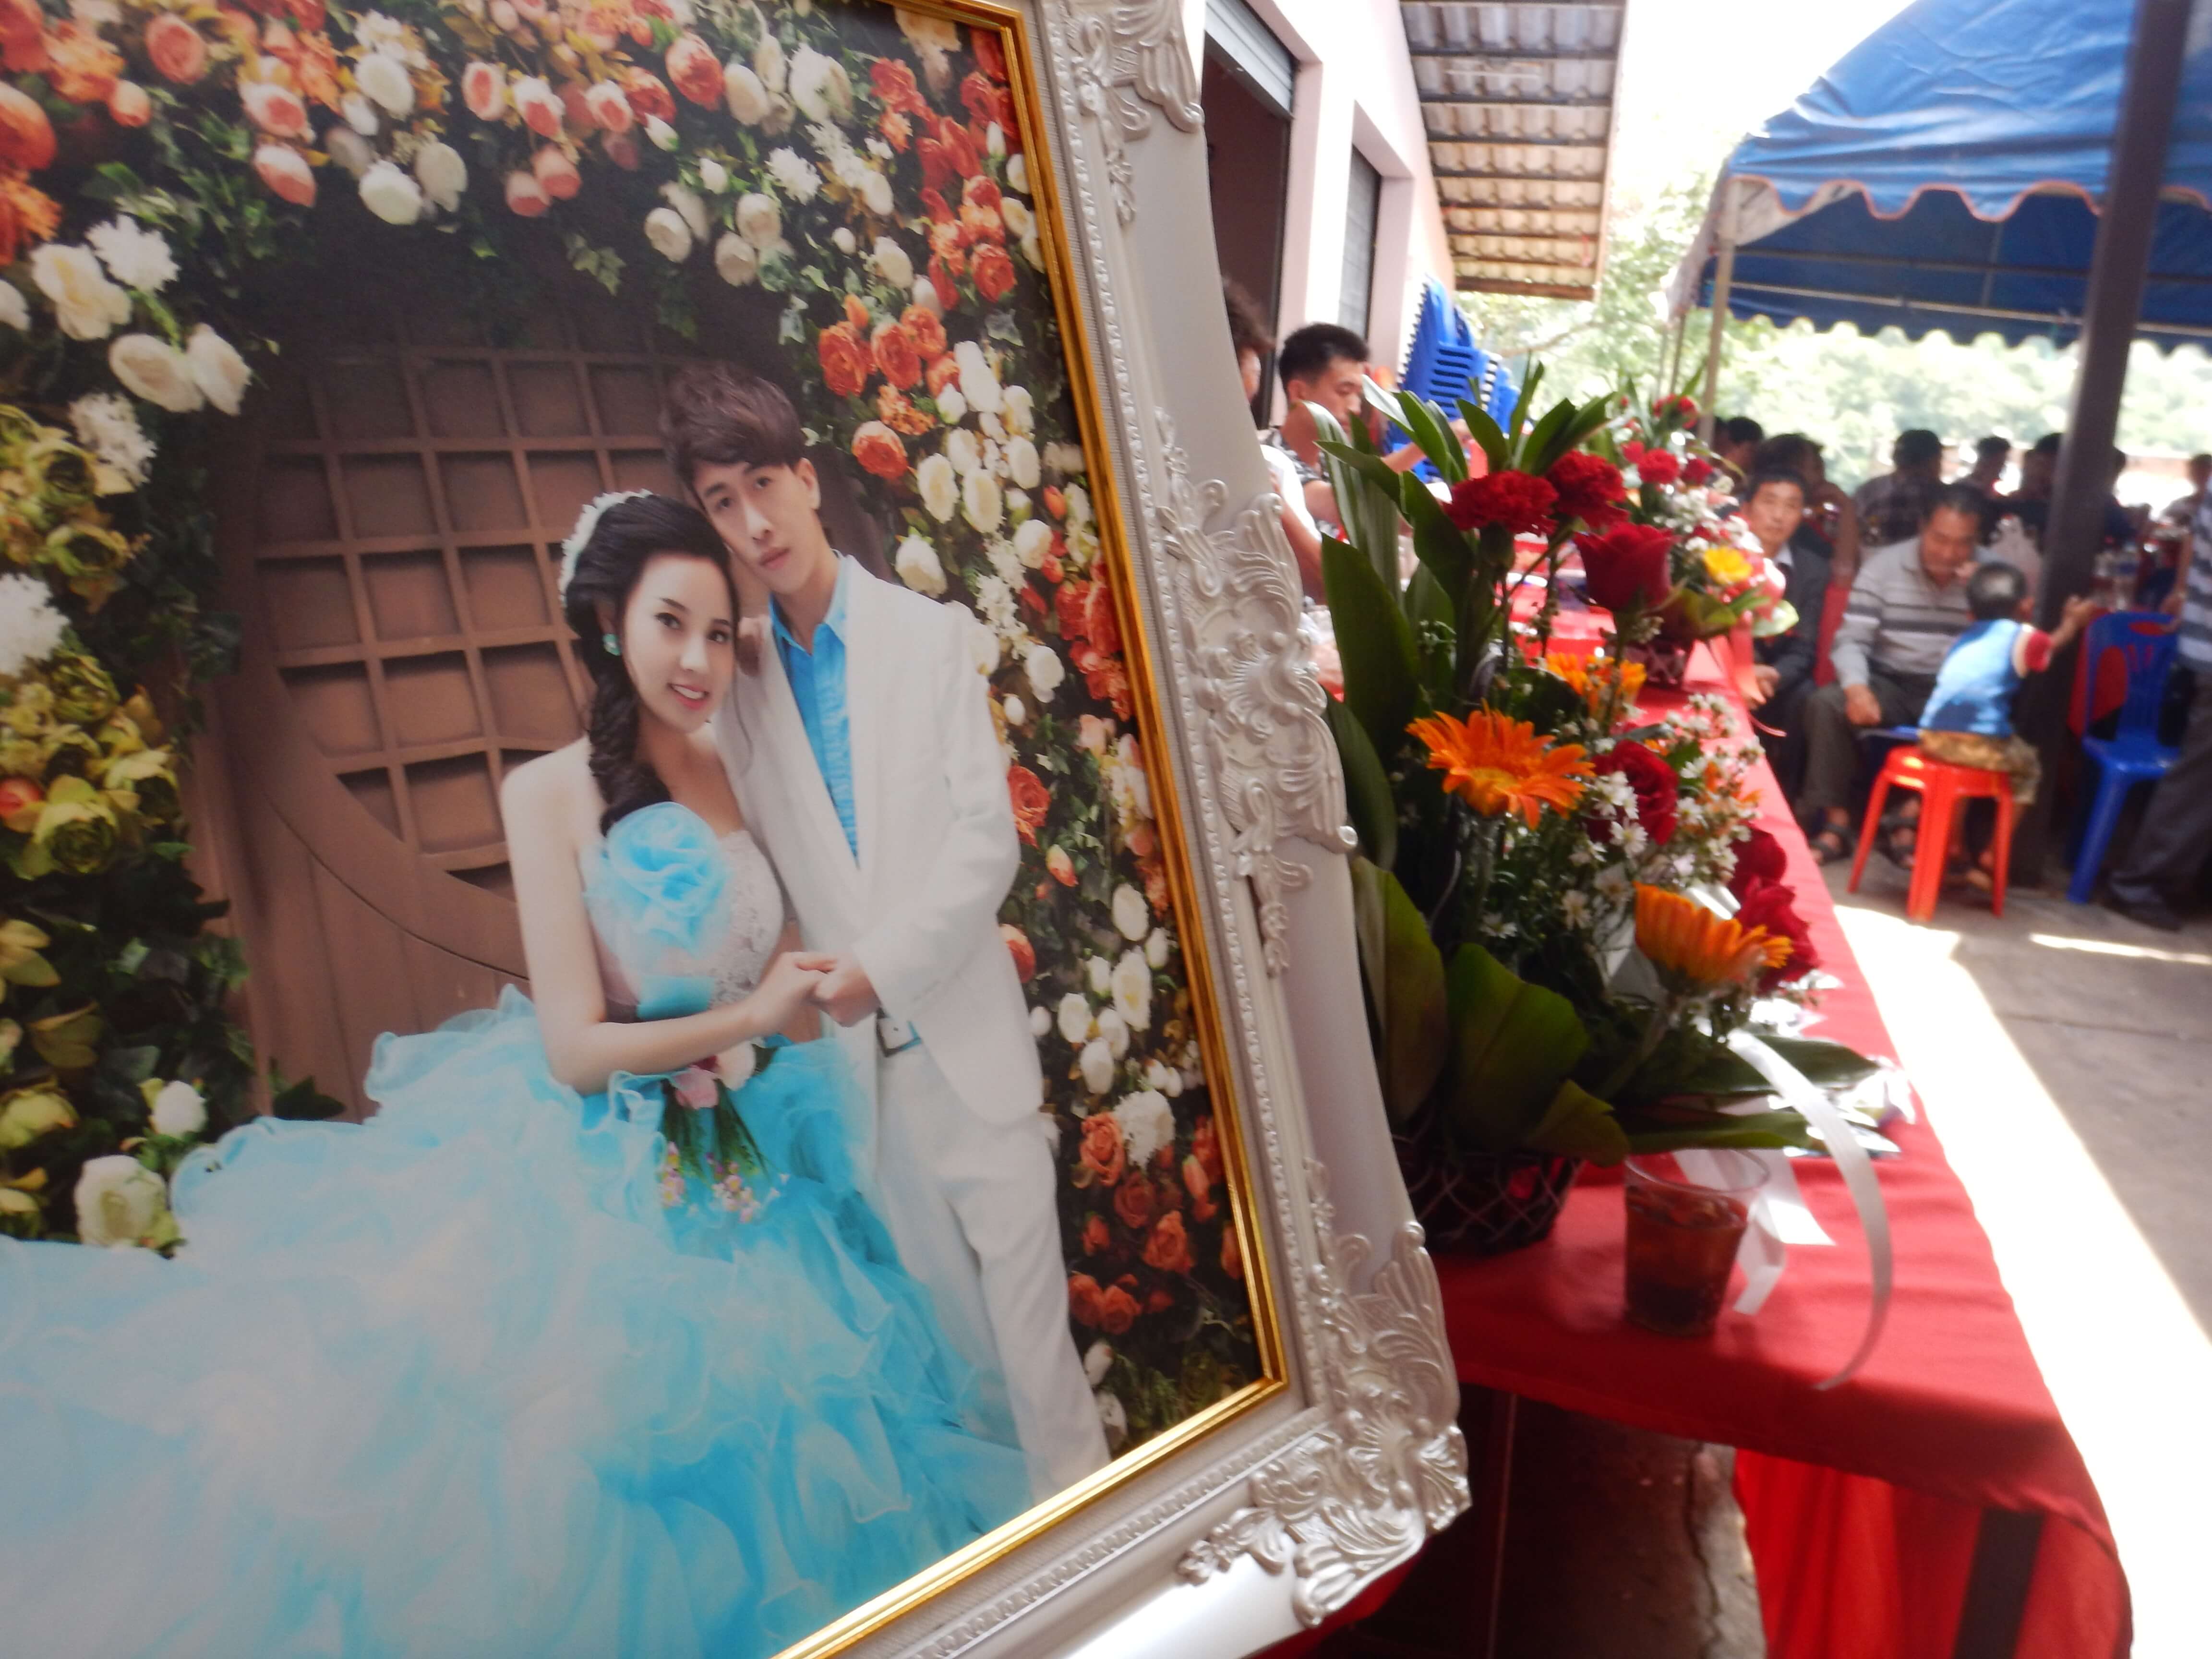 Mae Salong in Northern Thailand the portrait of a couple who is getting married with flowers and wedding guests in the background